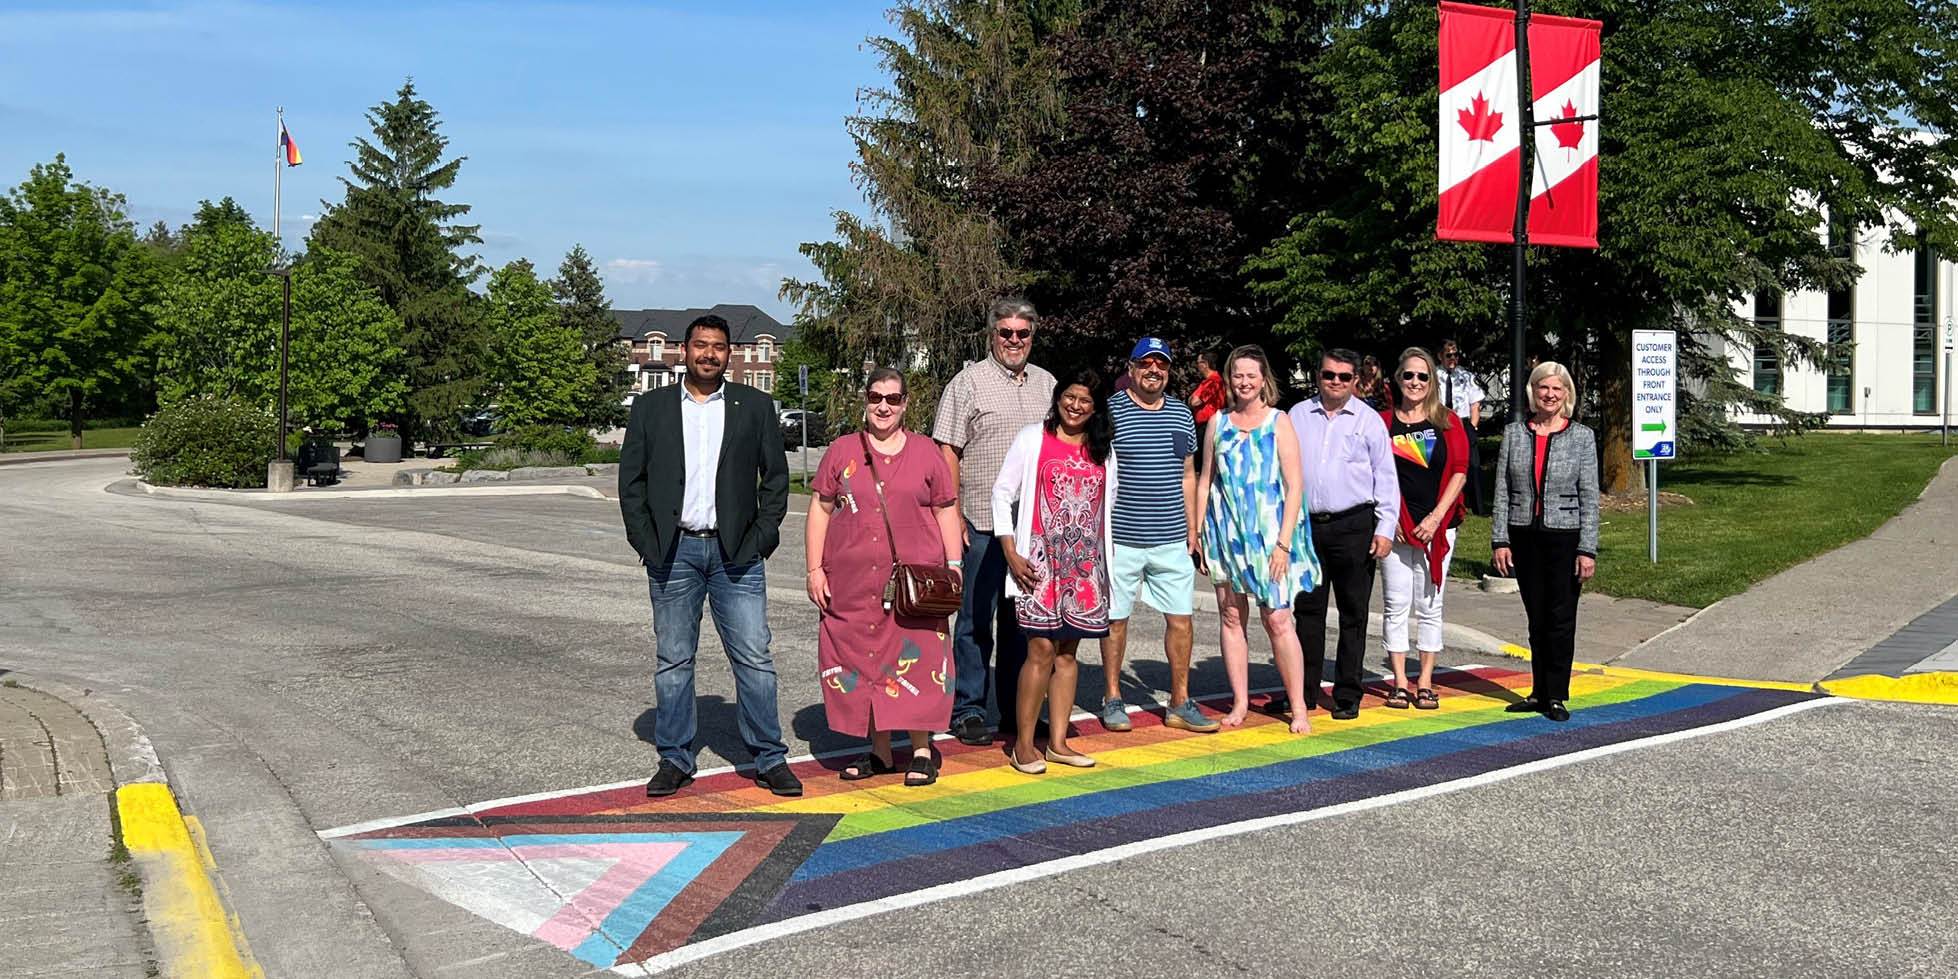 Progress crosswalk opening at the Civic Centre with Mayor and Council